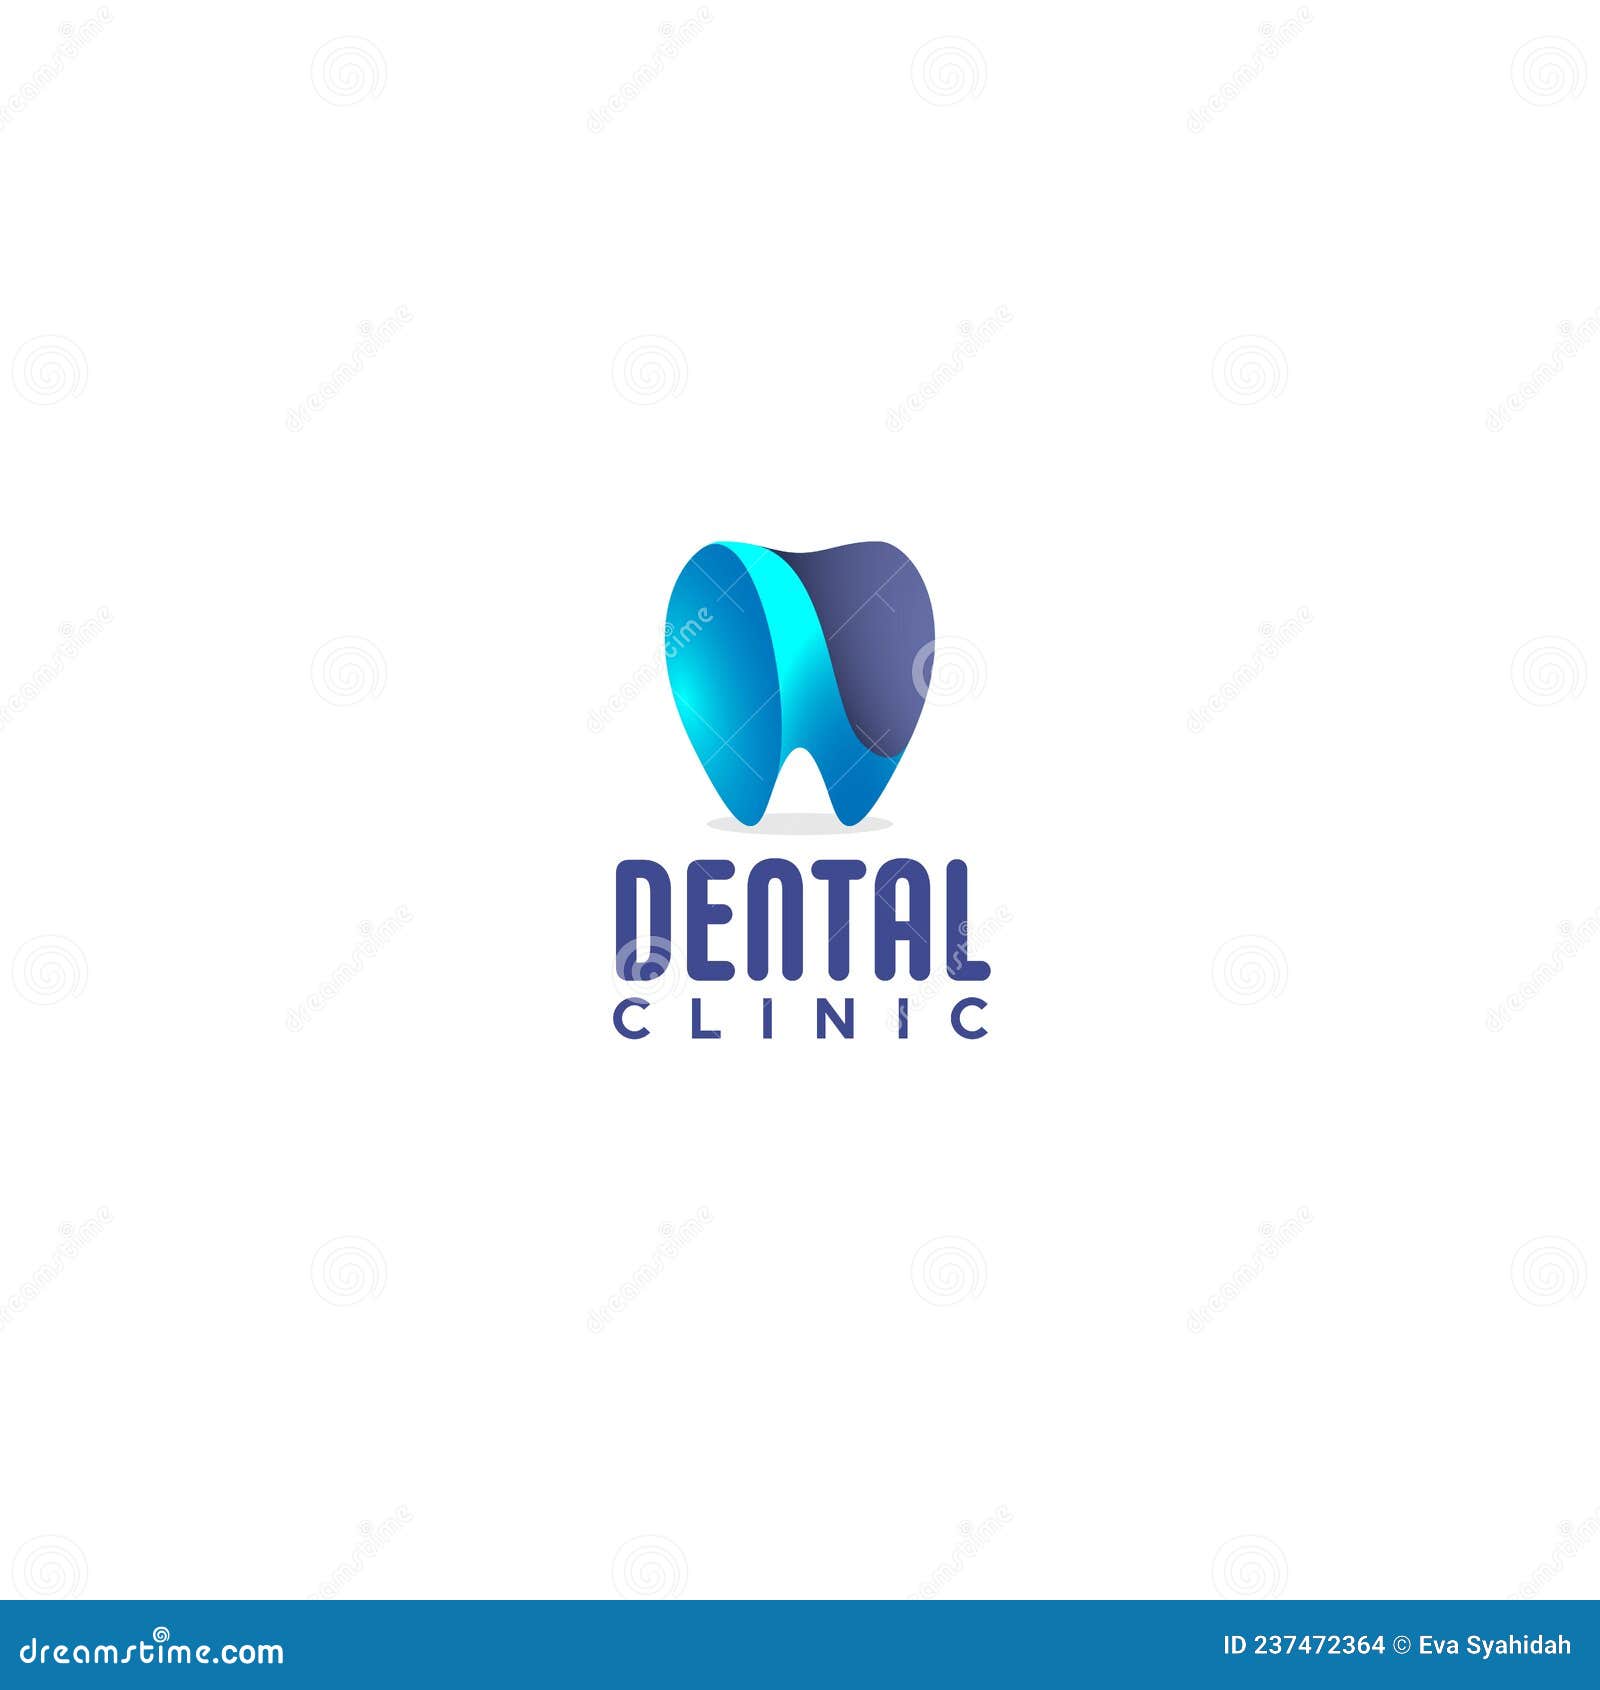 Dental Clinic Logo Projects | Photos, videos, logos, illustrations and  branding on Behance